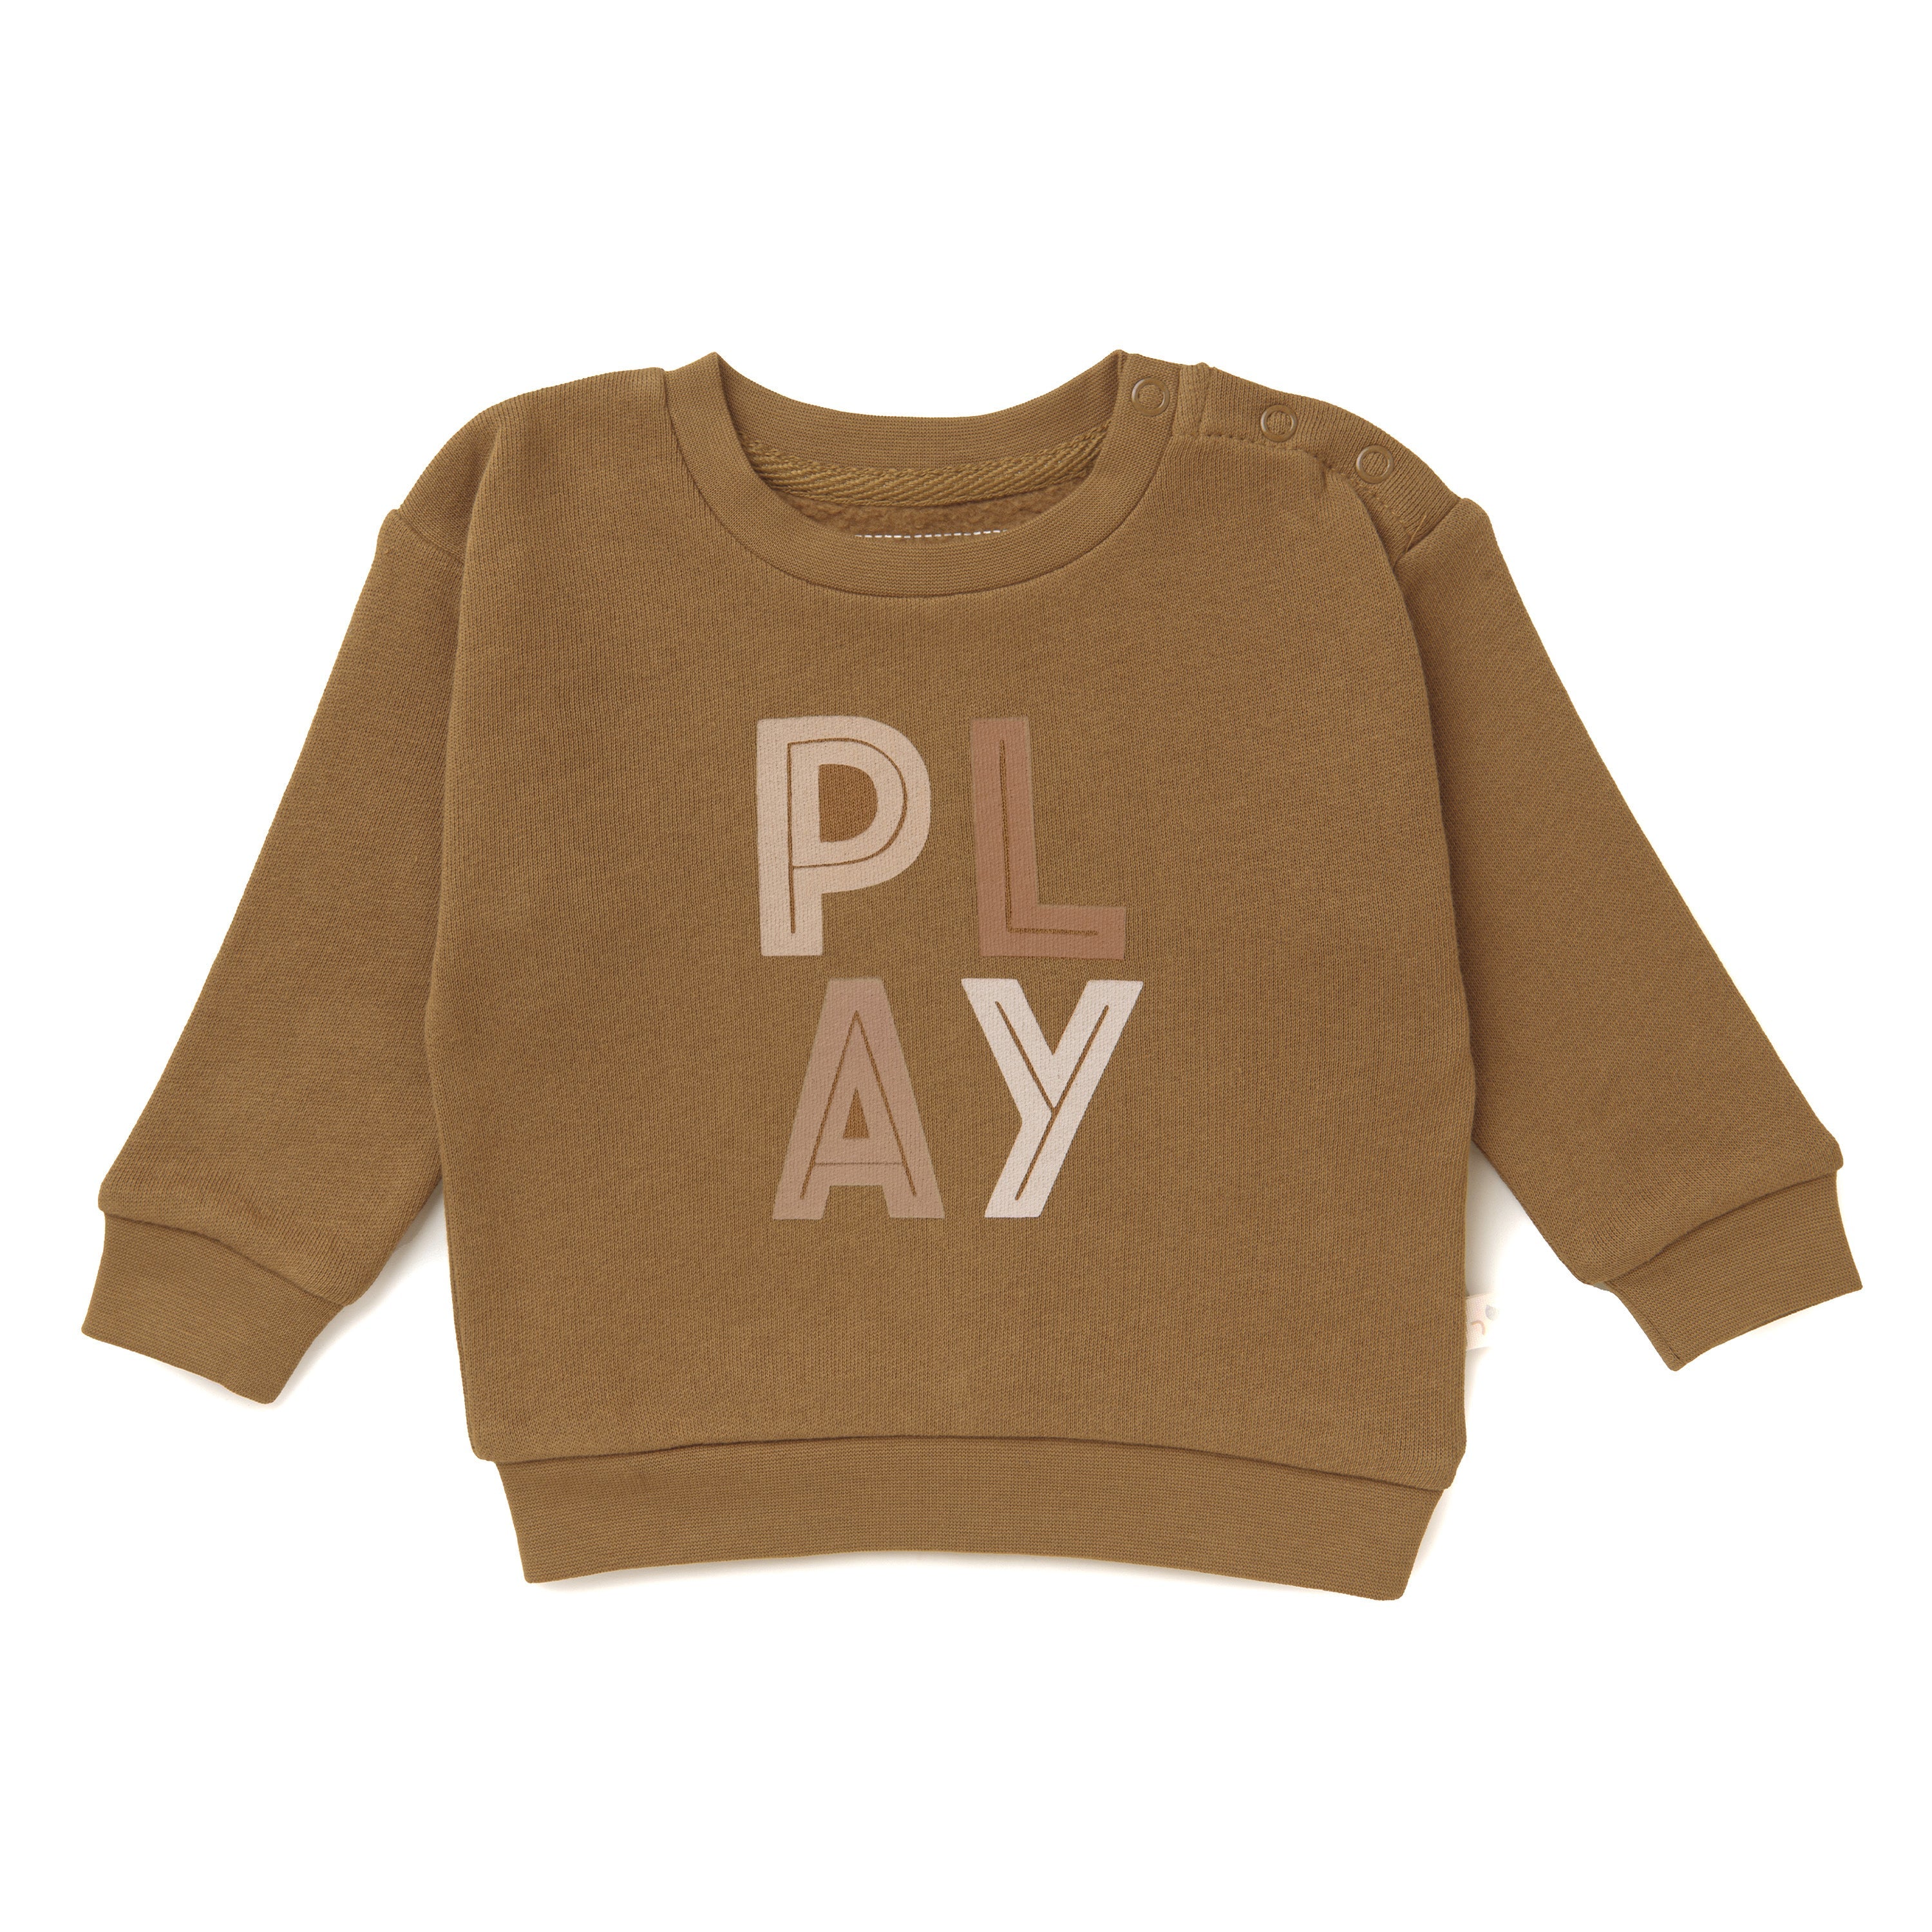 Child's brown Organic Graphic Sweatshirt - Play from Organic Baby with the word "play" printed in white block letters on the front, displayed on a white background.